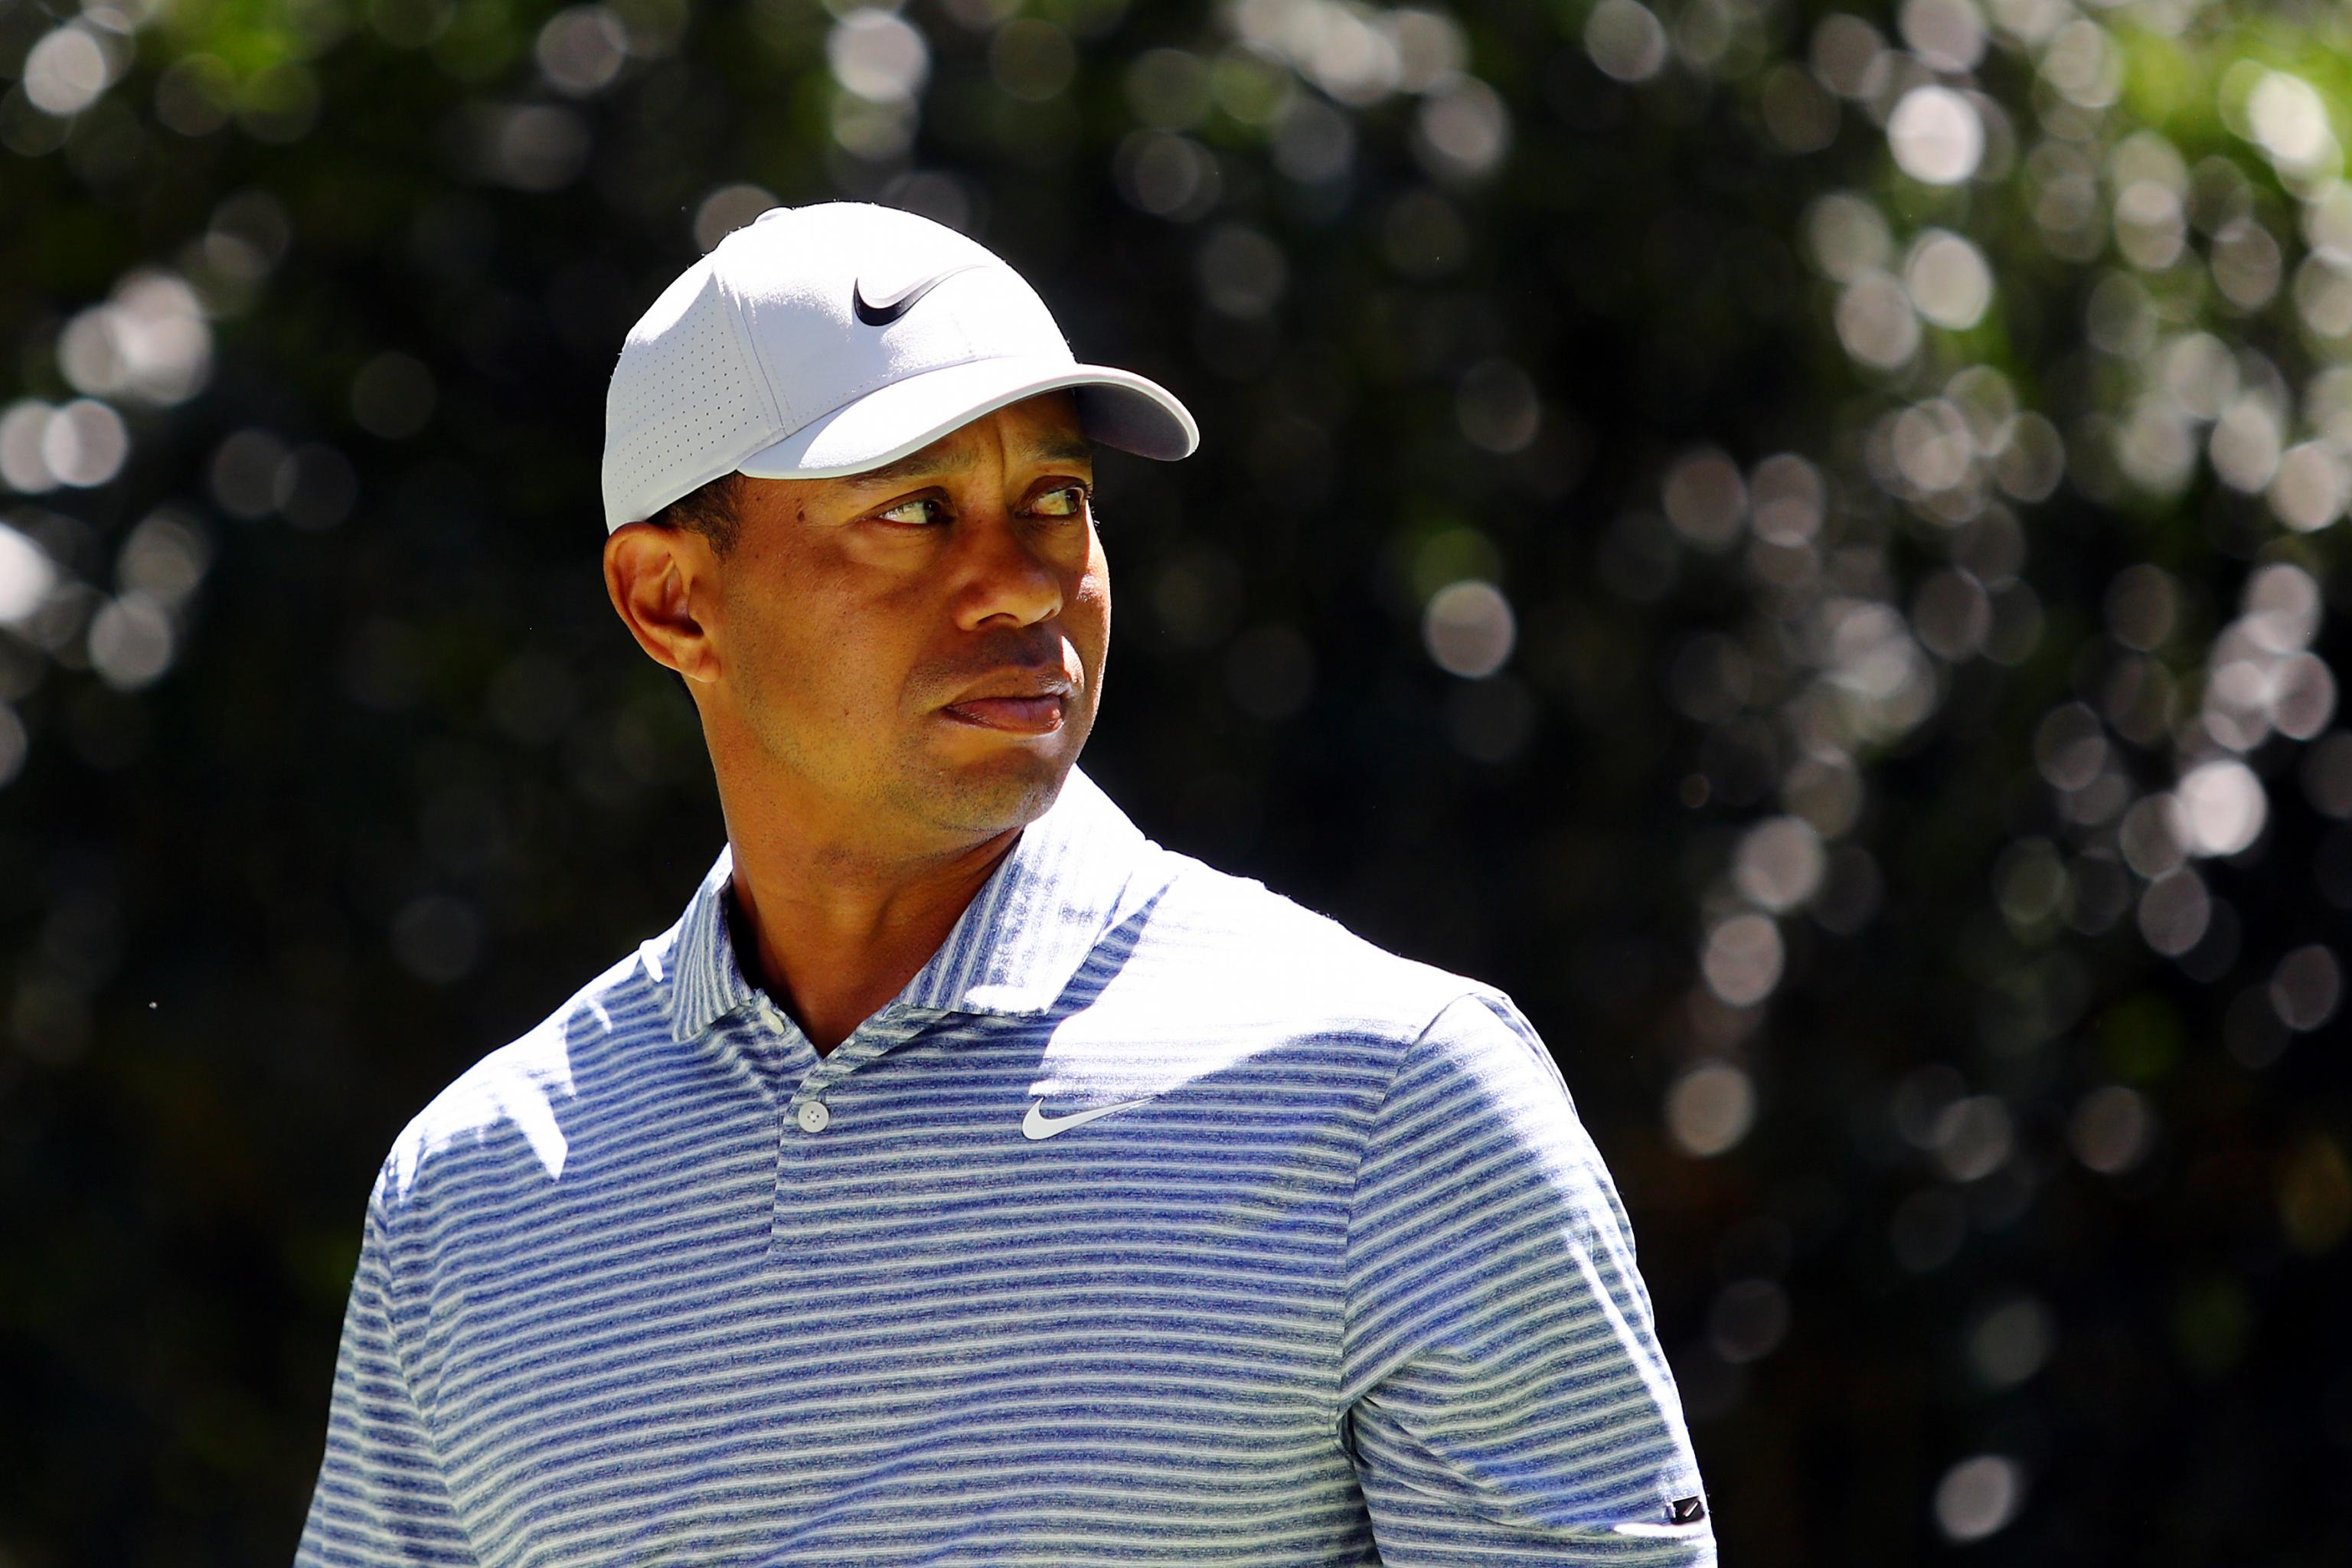 Tiger Woods Inconsistent In Wgc Mexico Championship 2019 3rd Round Bleacher Report Latest News Videos And Highlights